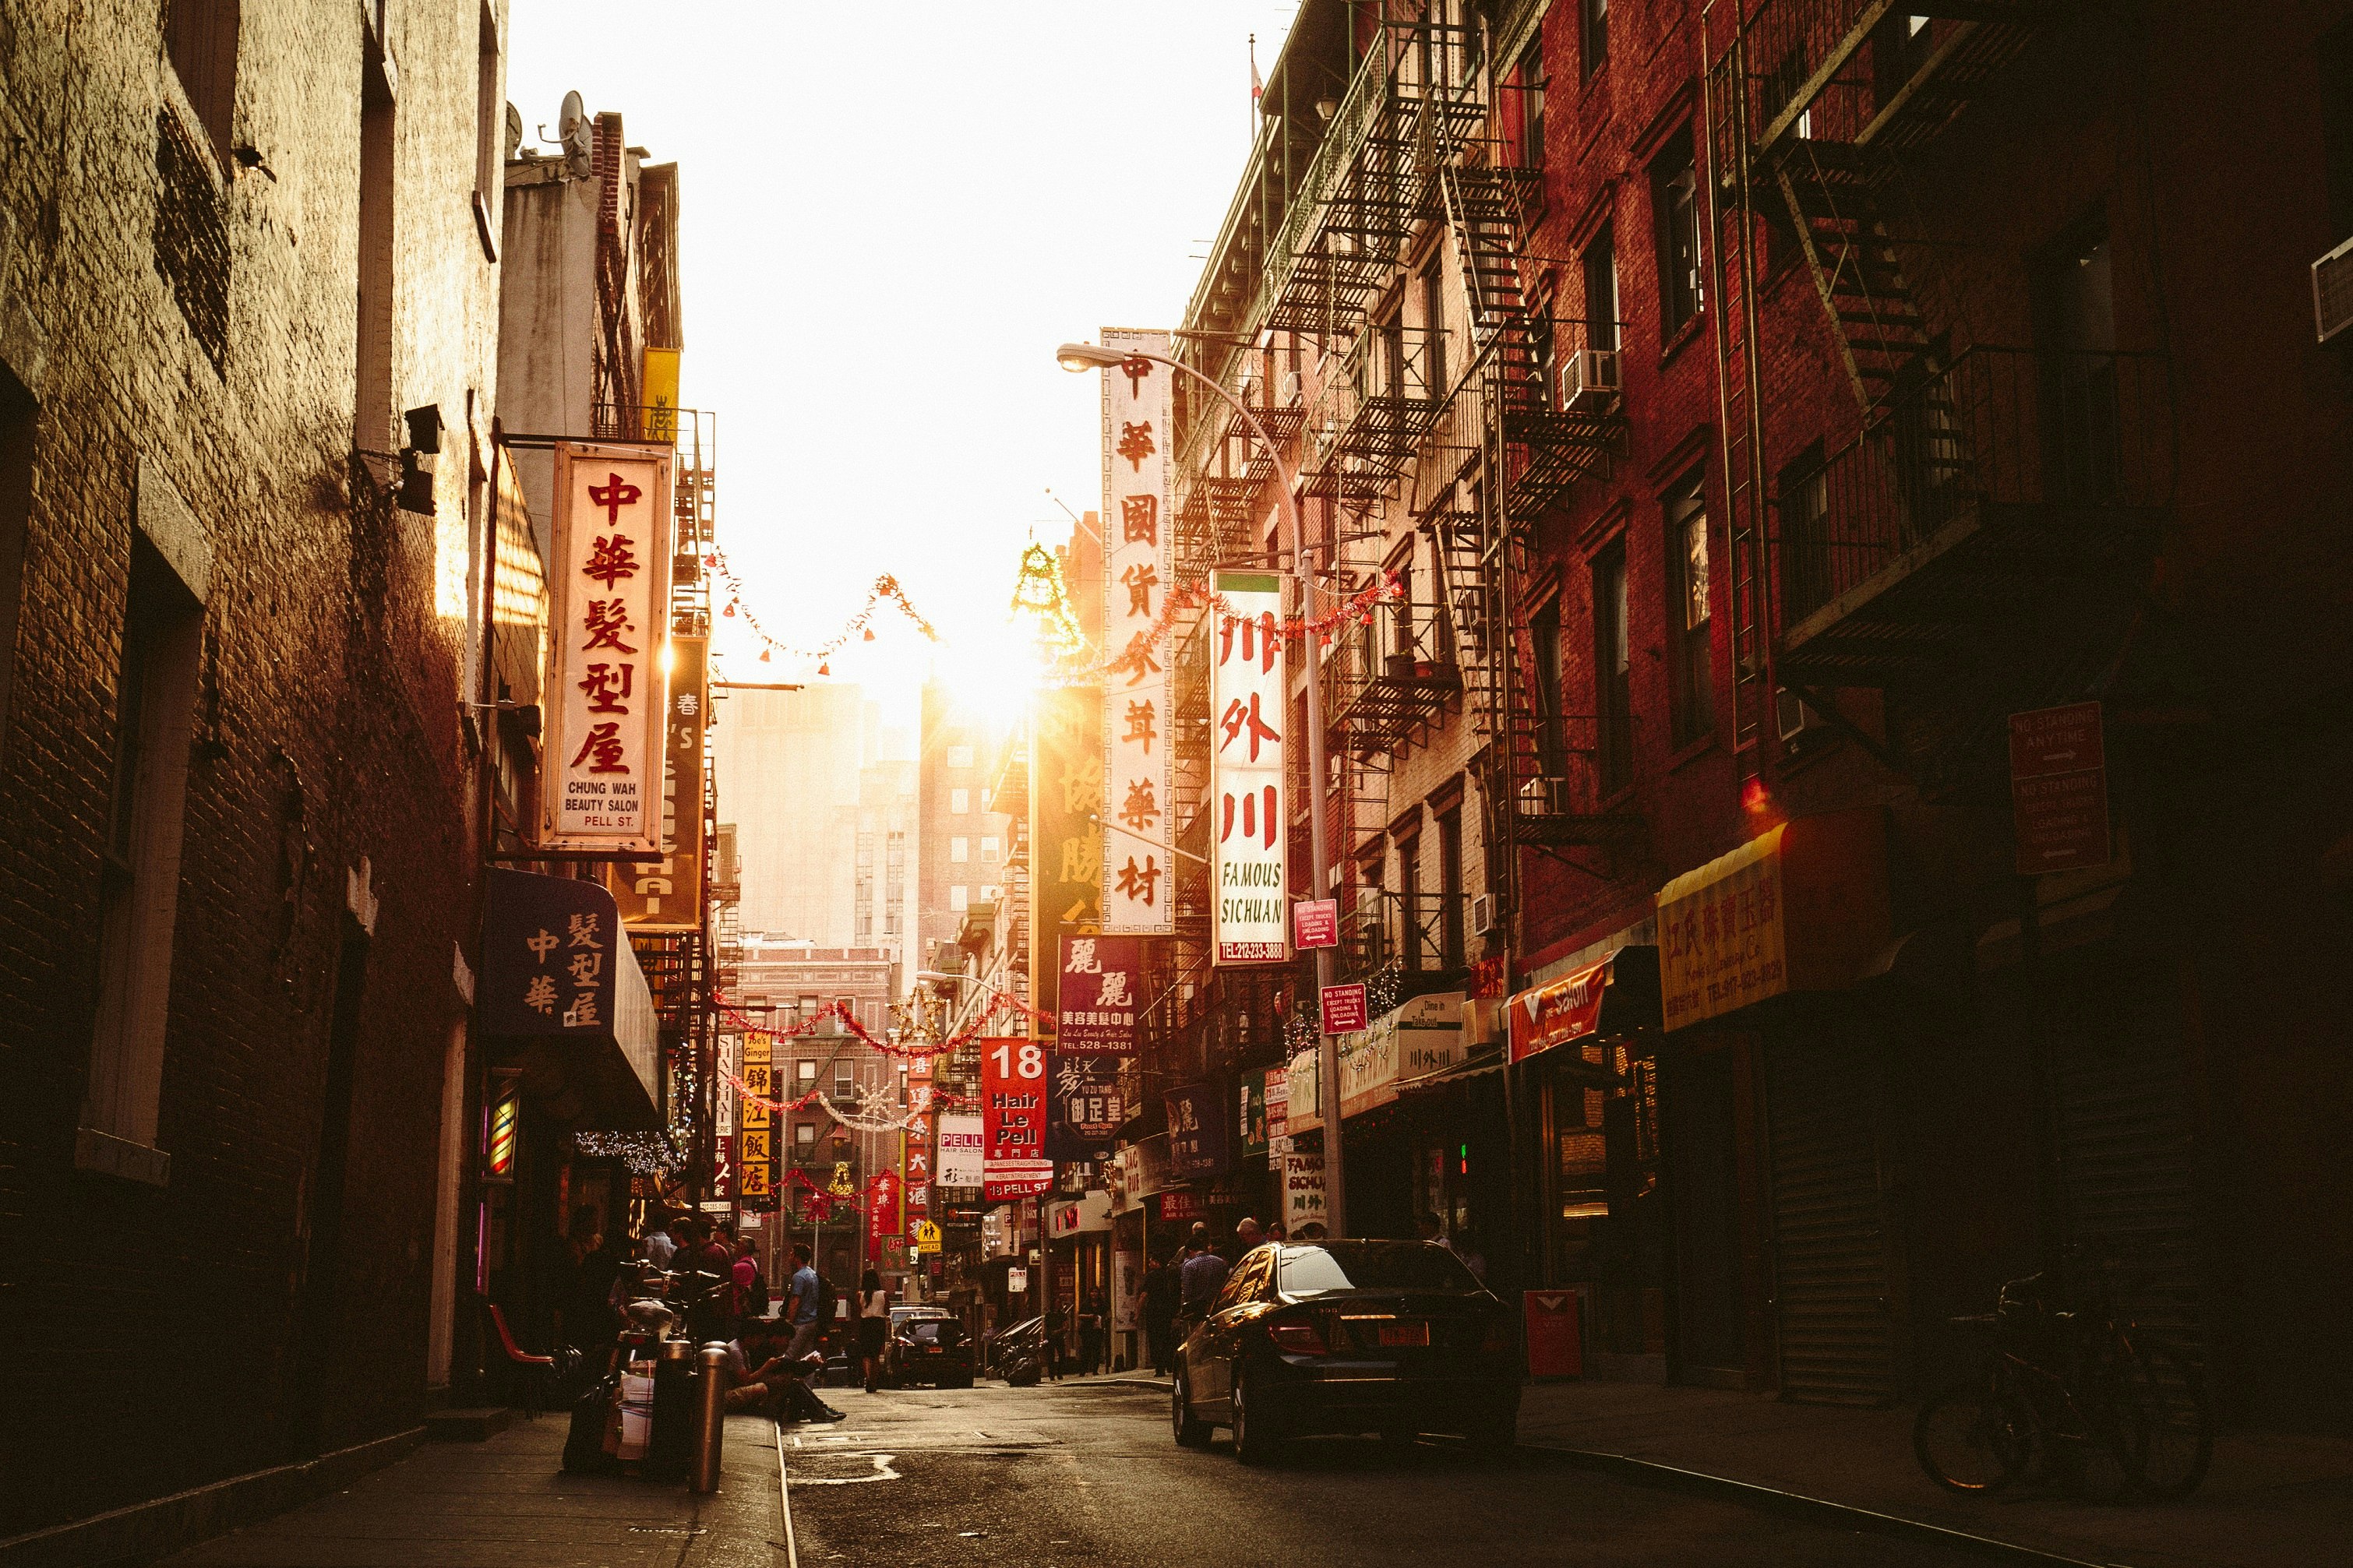 Must-see attractions SoHo & Chinatown, New York City - Lonely Planet